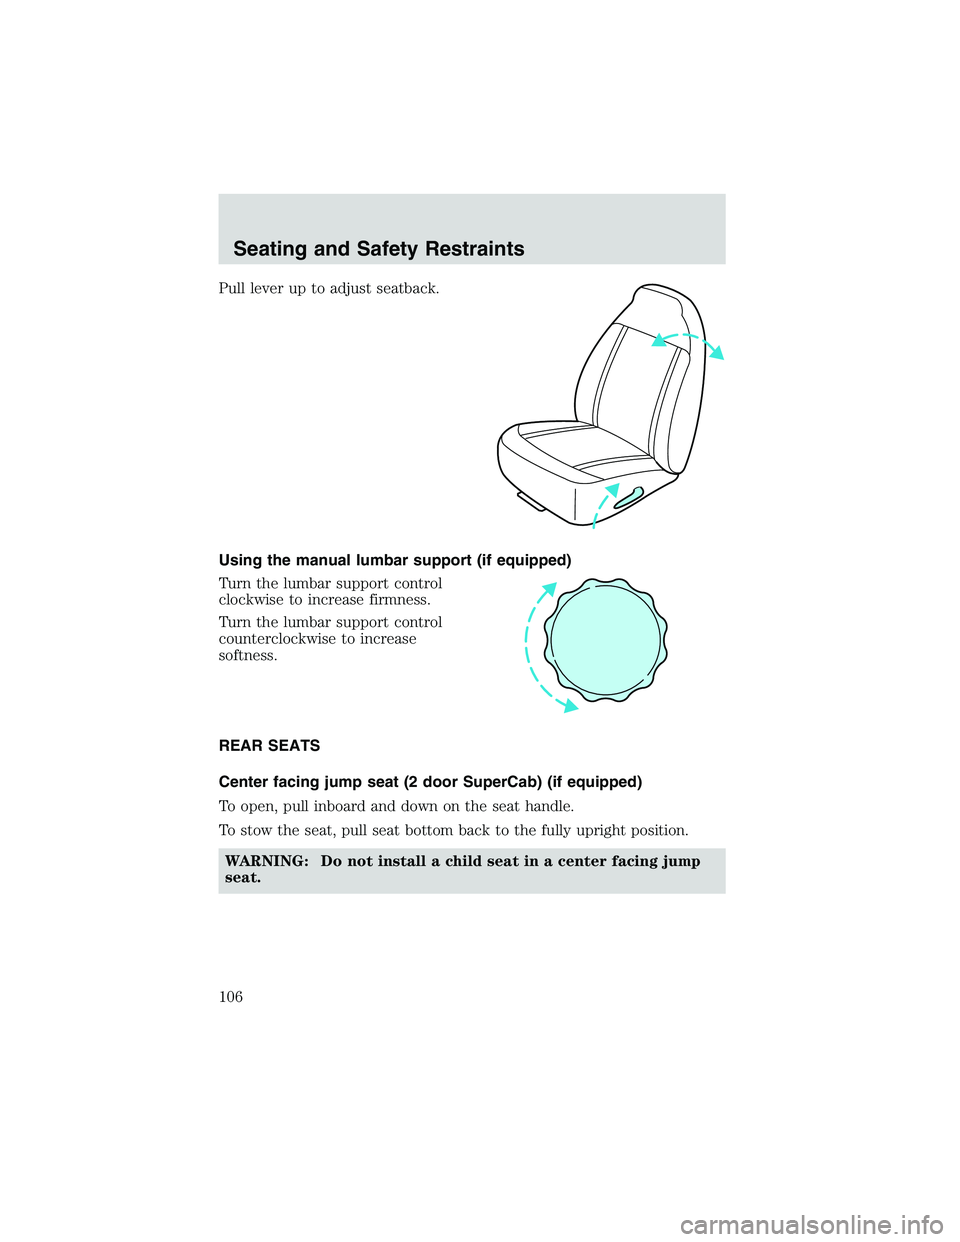 MAZDA MODEL B4000 4WD 2002  Owners Manual Pull lever up to adjust seatback.
Using the manual lumbar support (if equipped)
Turn the lumbar support control
clockwise to increase firmness.
Turn the lumbar support control
counterclockwise to incr